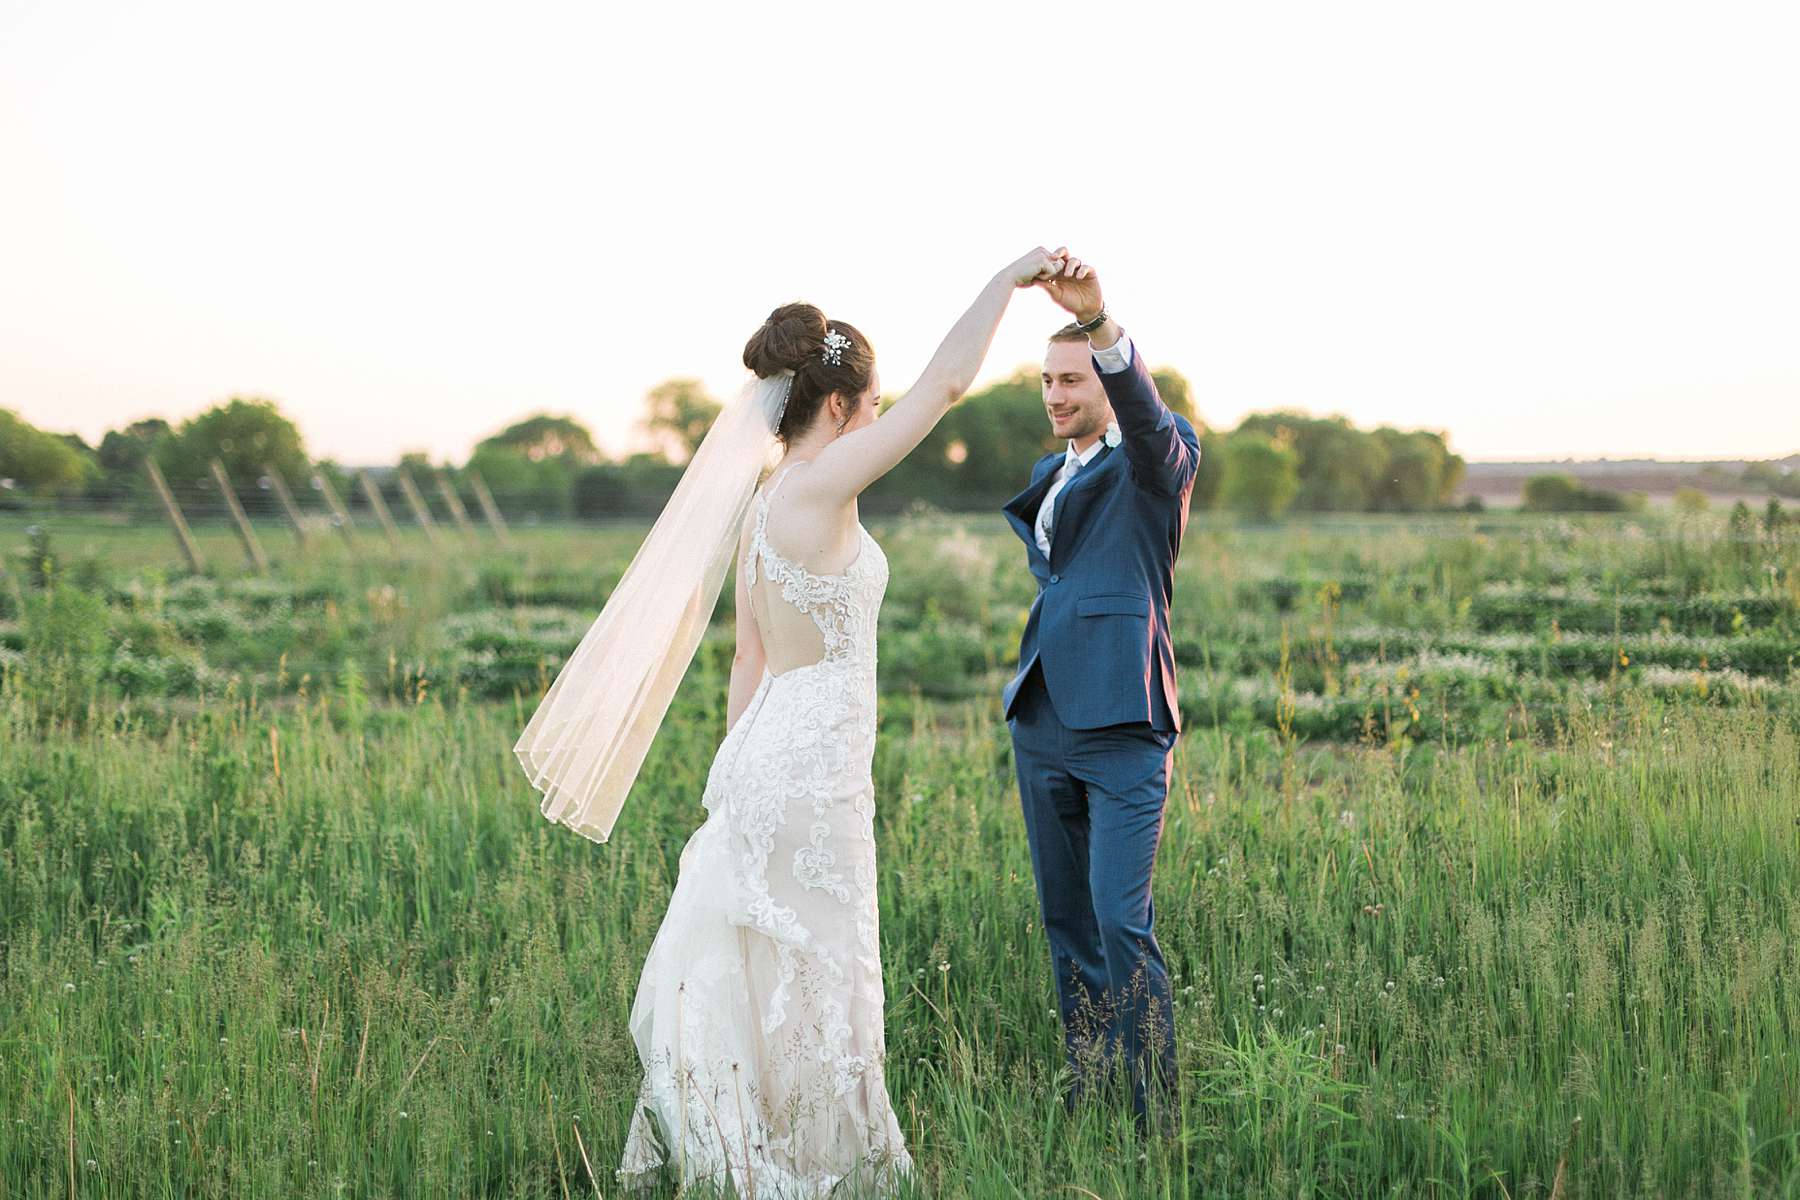 sunset bride and groom portrait, rustic romantic wedding at the landing 1841, photo by laurelyn savannah photography